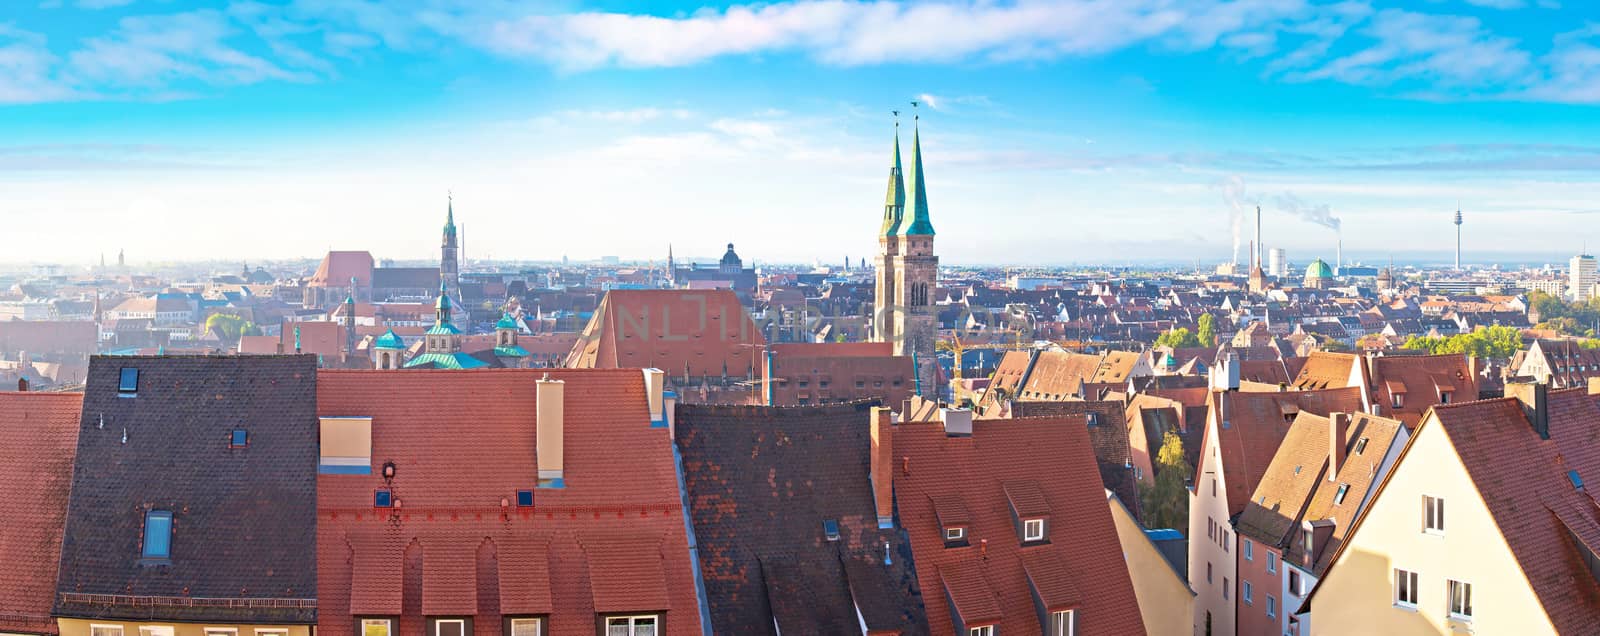 Nurnberg. Rooftops and cityscape of Nuremberg old town panoramic view, Bavaria region of Germany